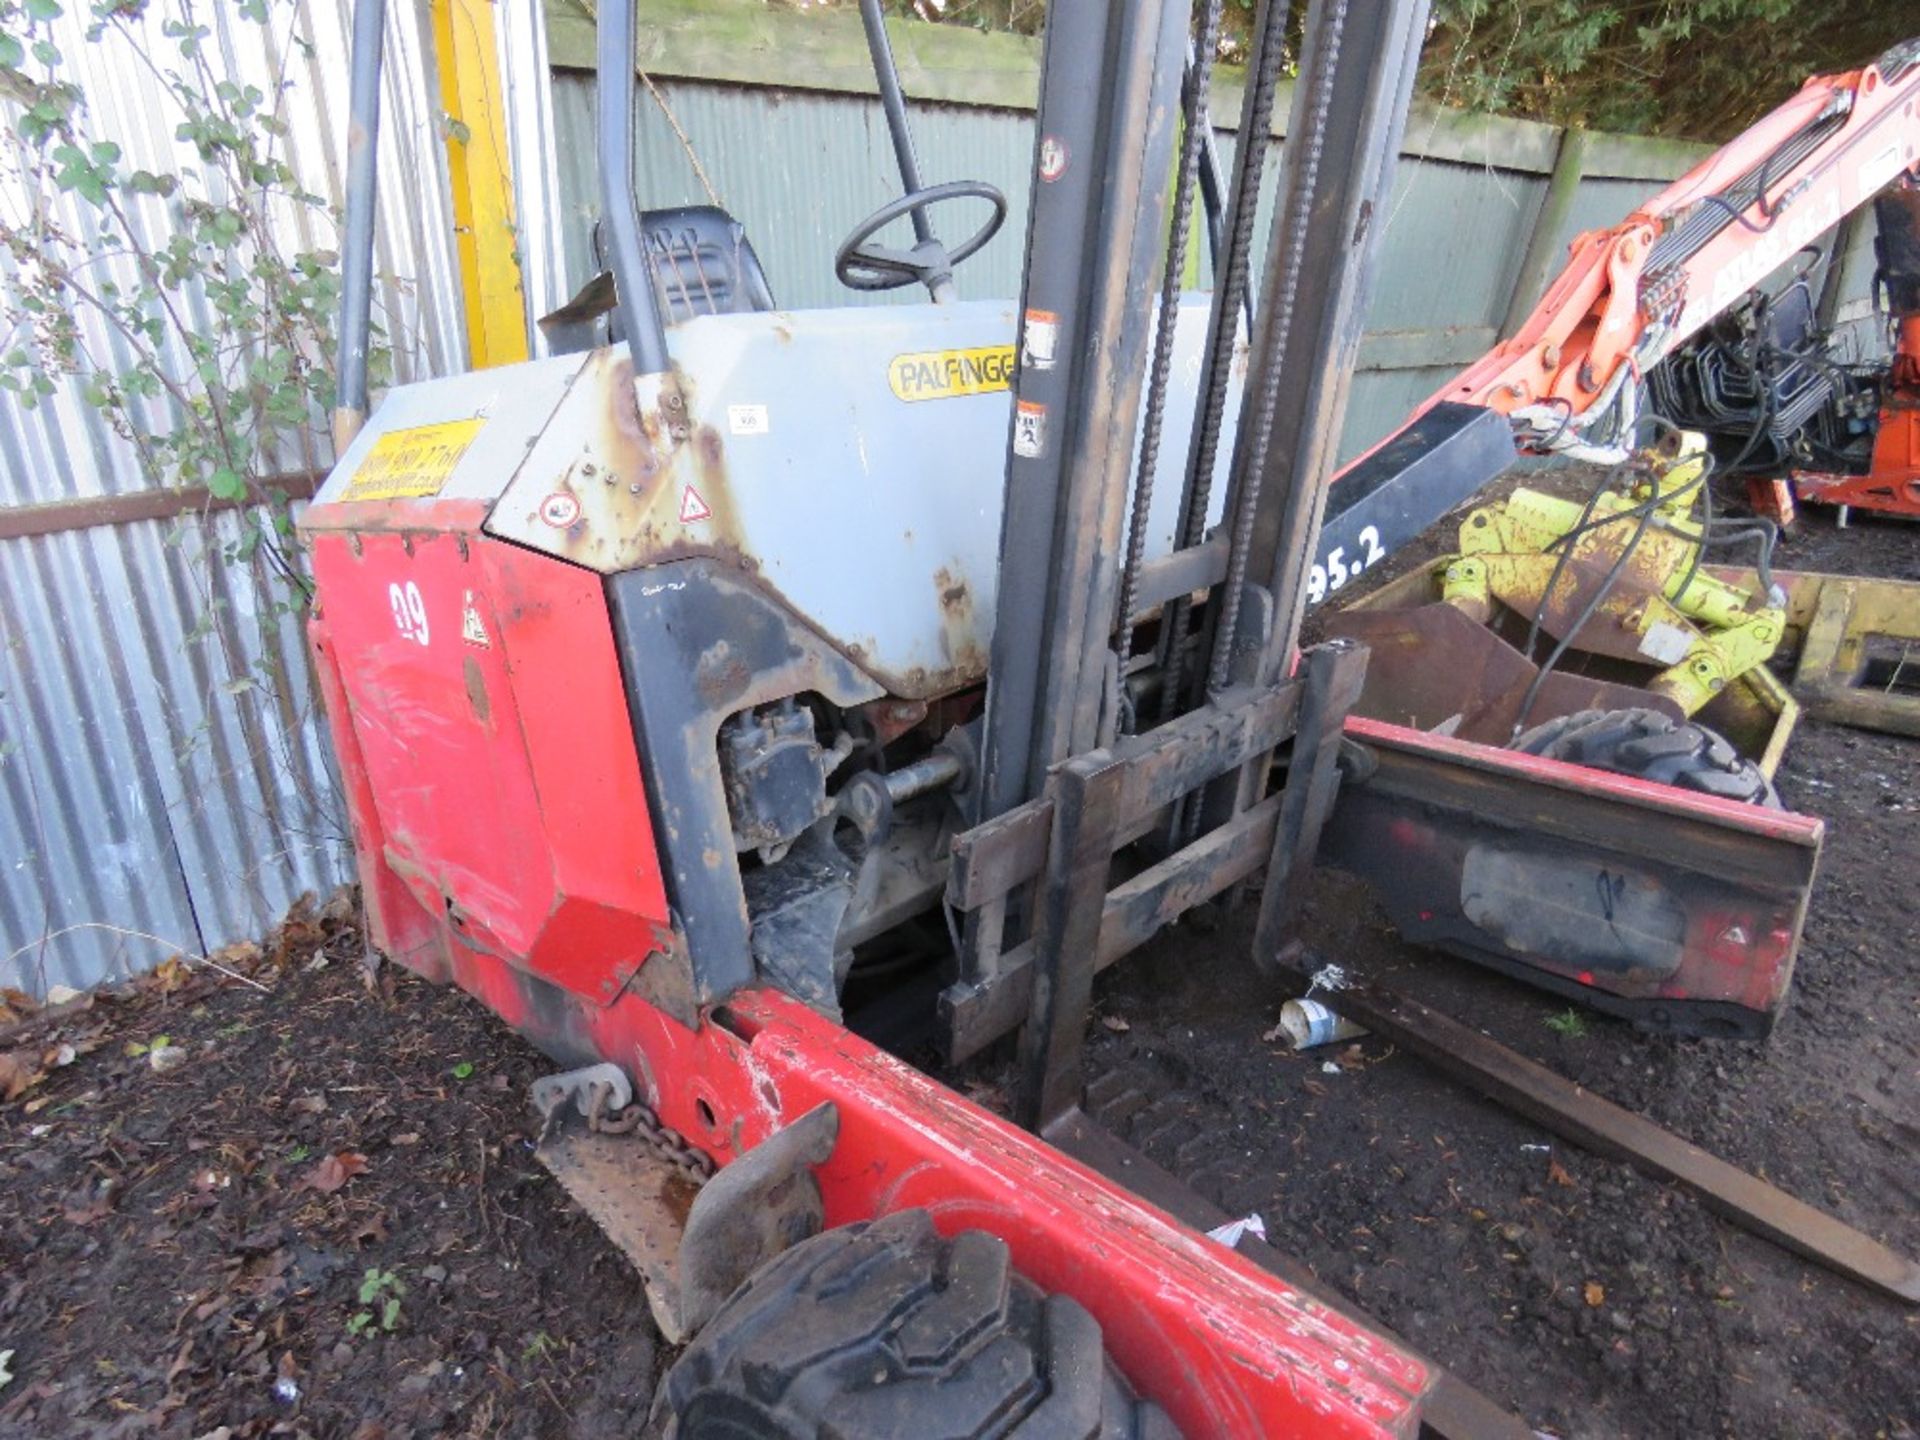 Palfinger Crayler piggy back forklift, 1770 rec.hrs, yr2003. Direct ex local company. WHEN TESTED